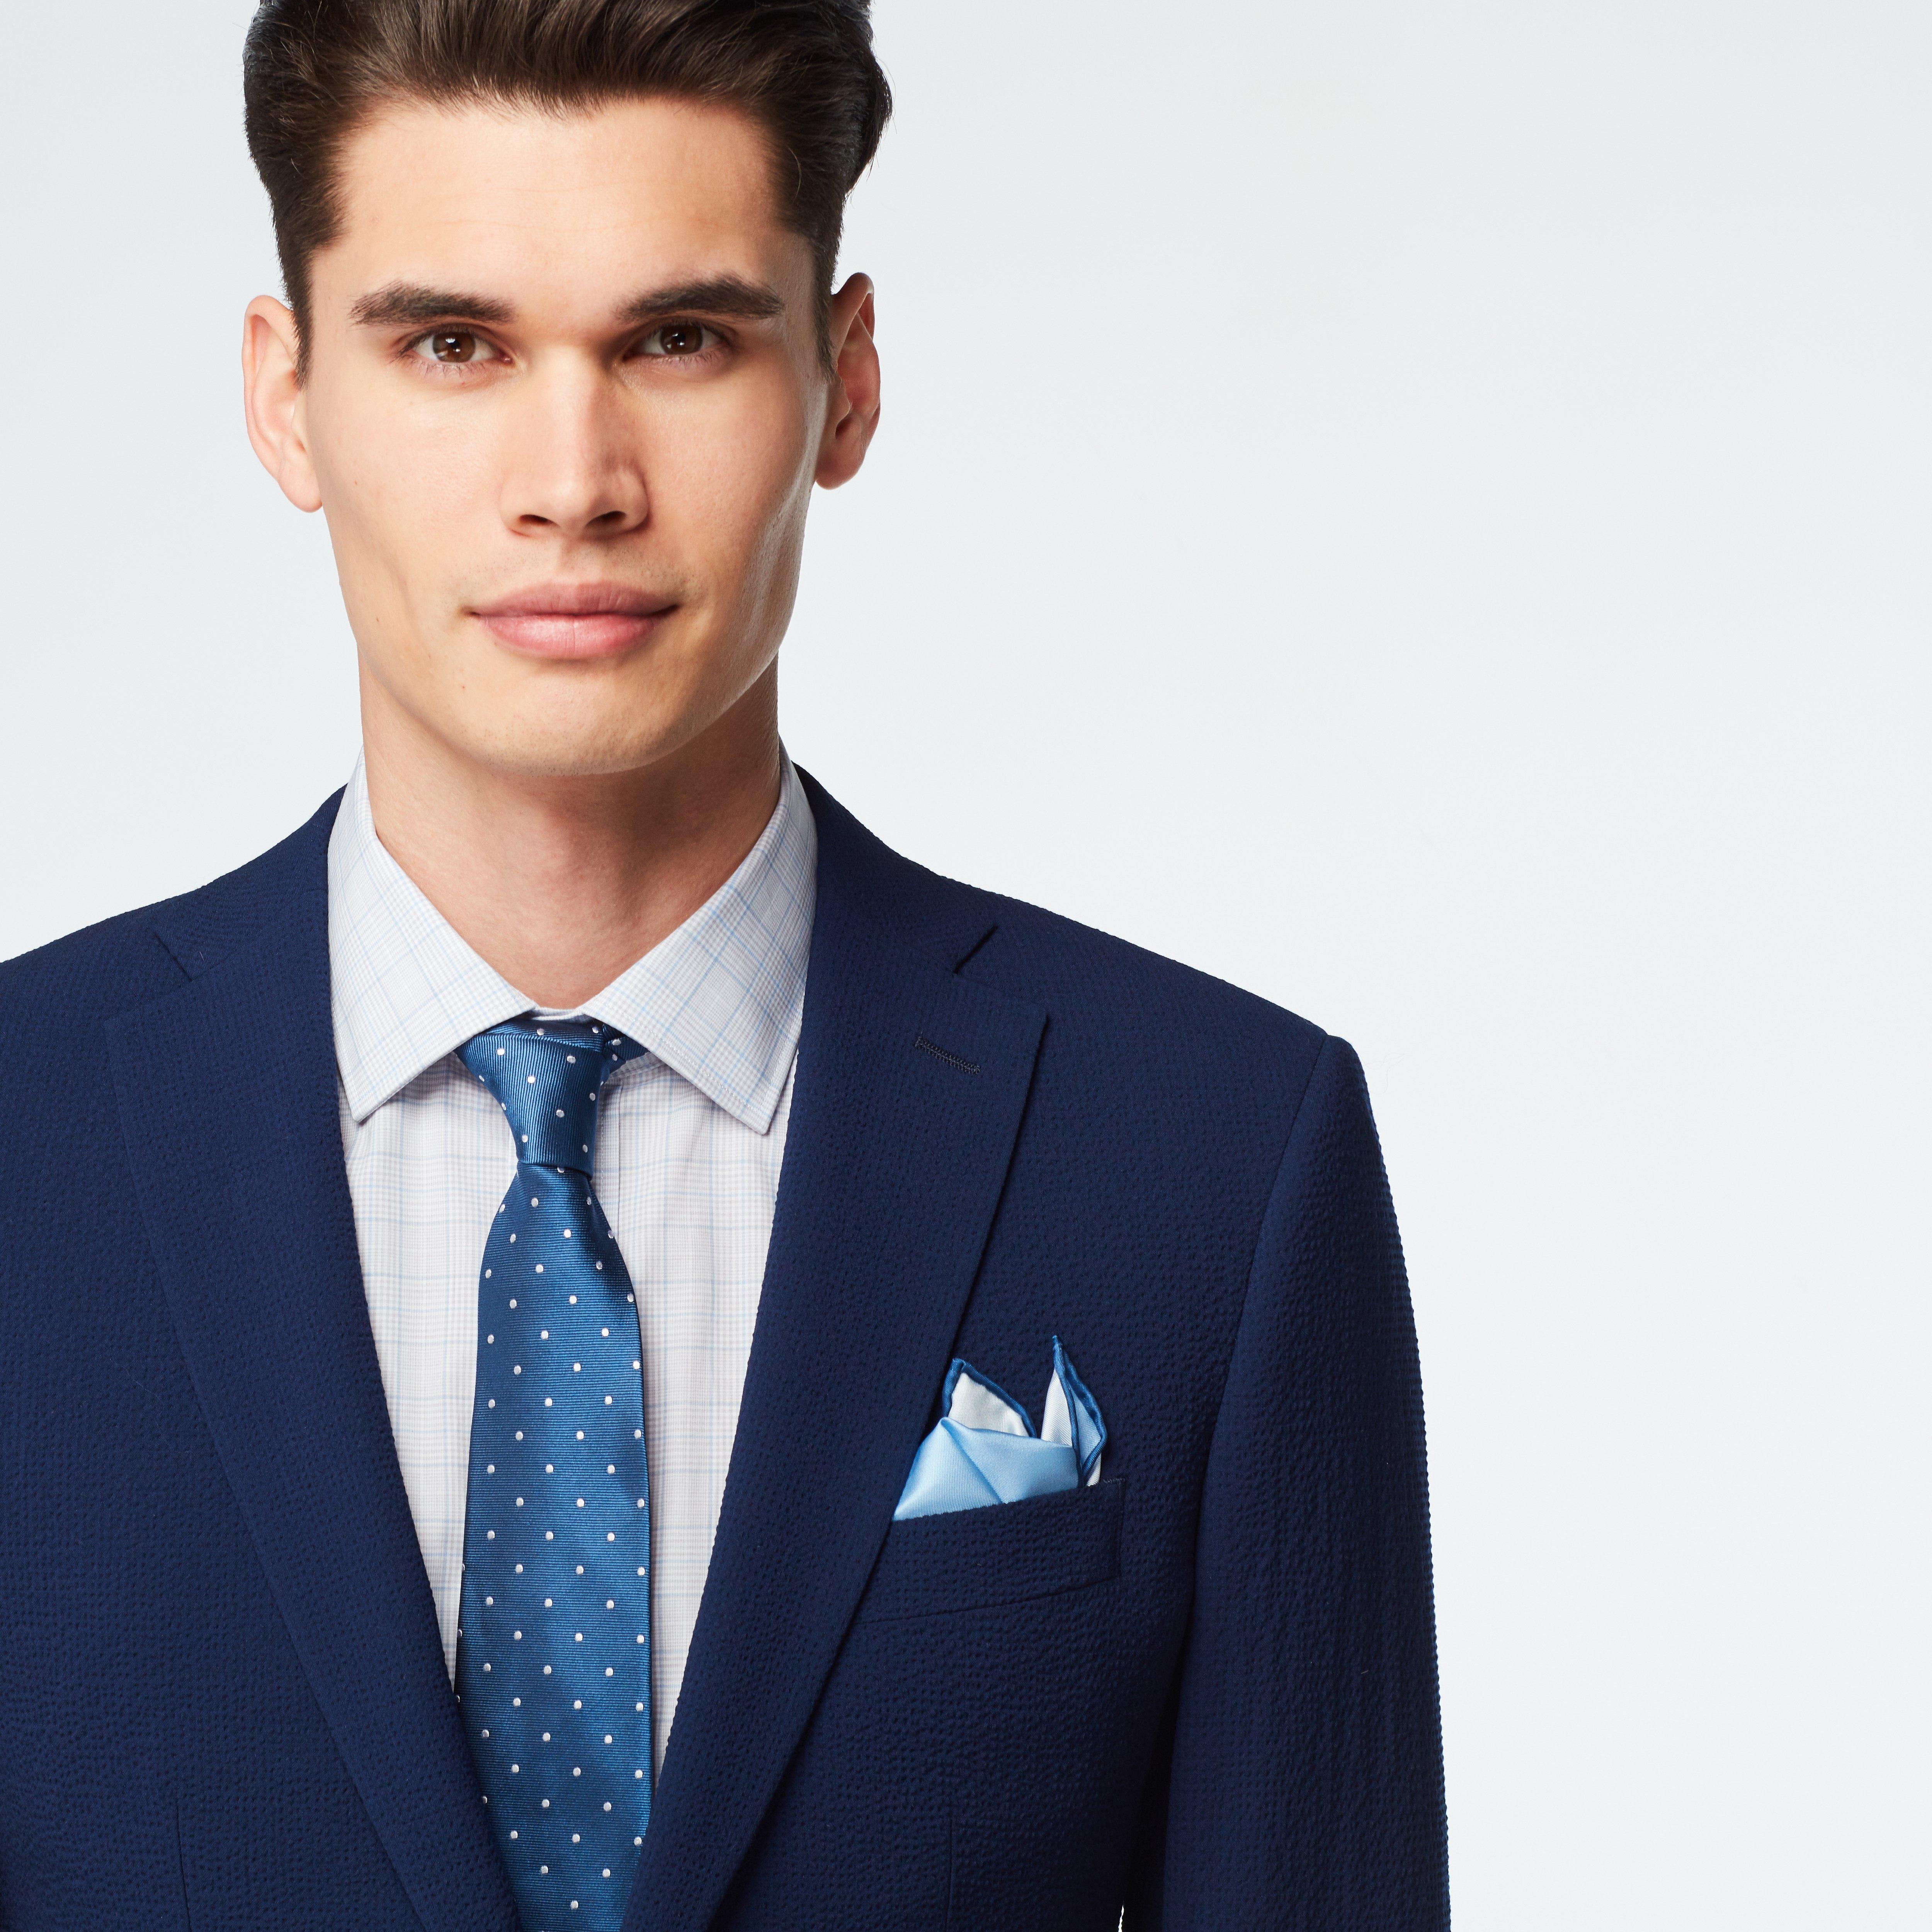 Custom Suits Made For You - Stapleford Seersucker Navy Suit | INDOCHINO